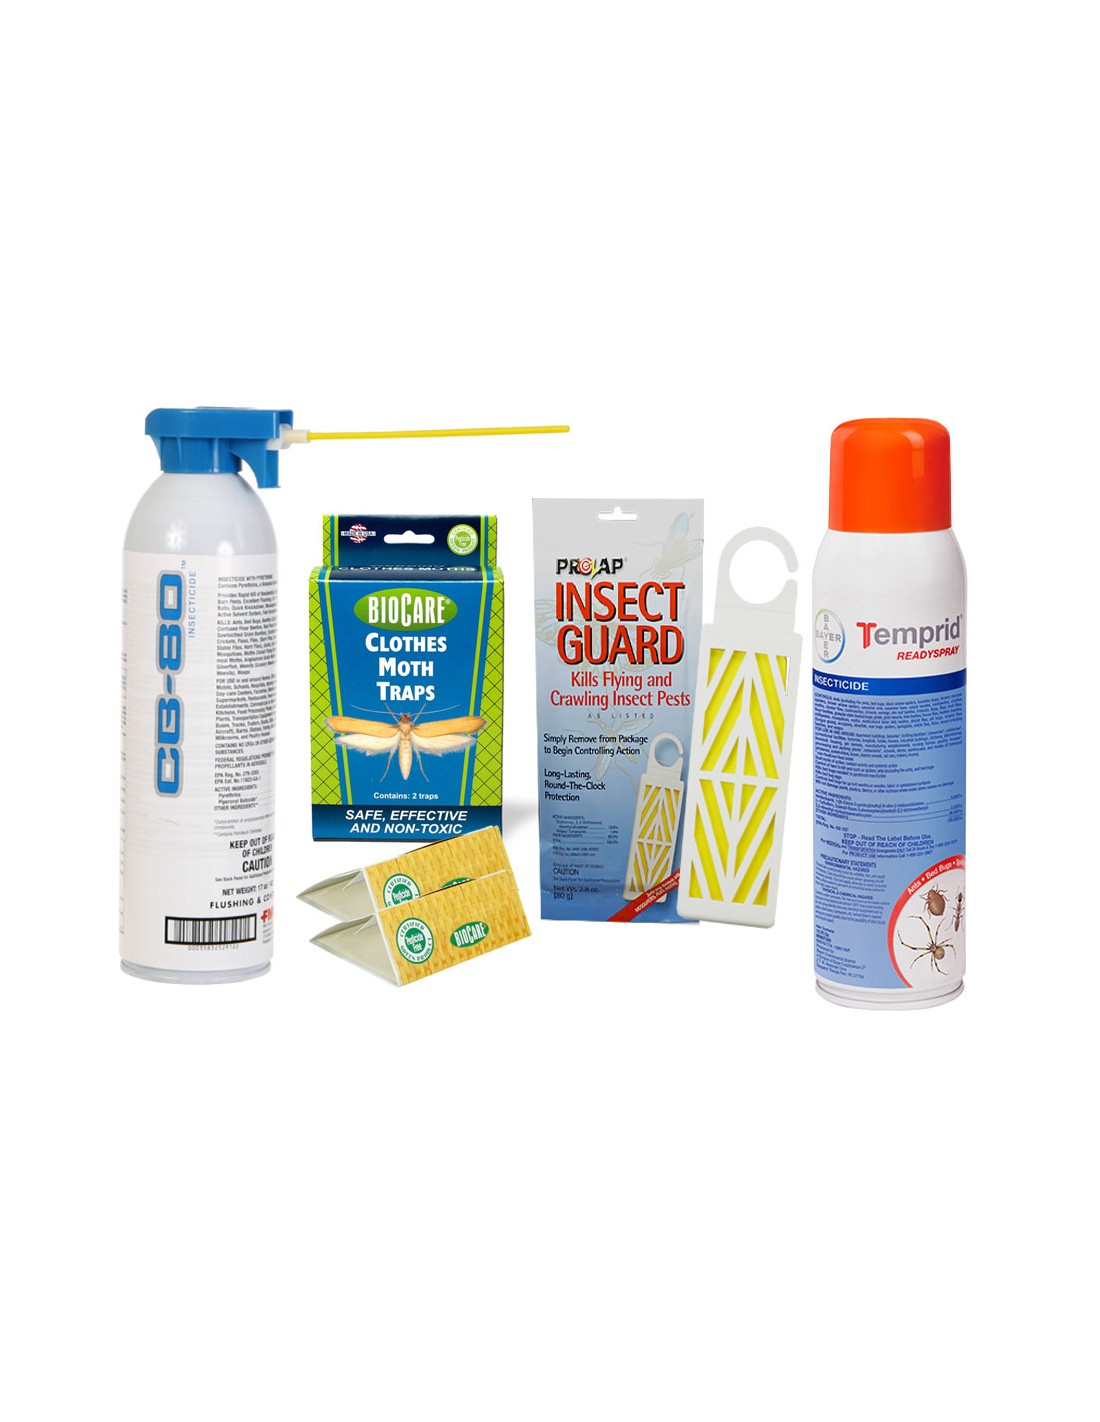 Im looking for something to kill carpet beetles, larvae, eggs and pupa stage. I need pet safe products